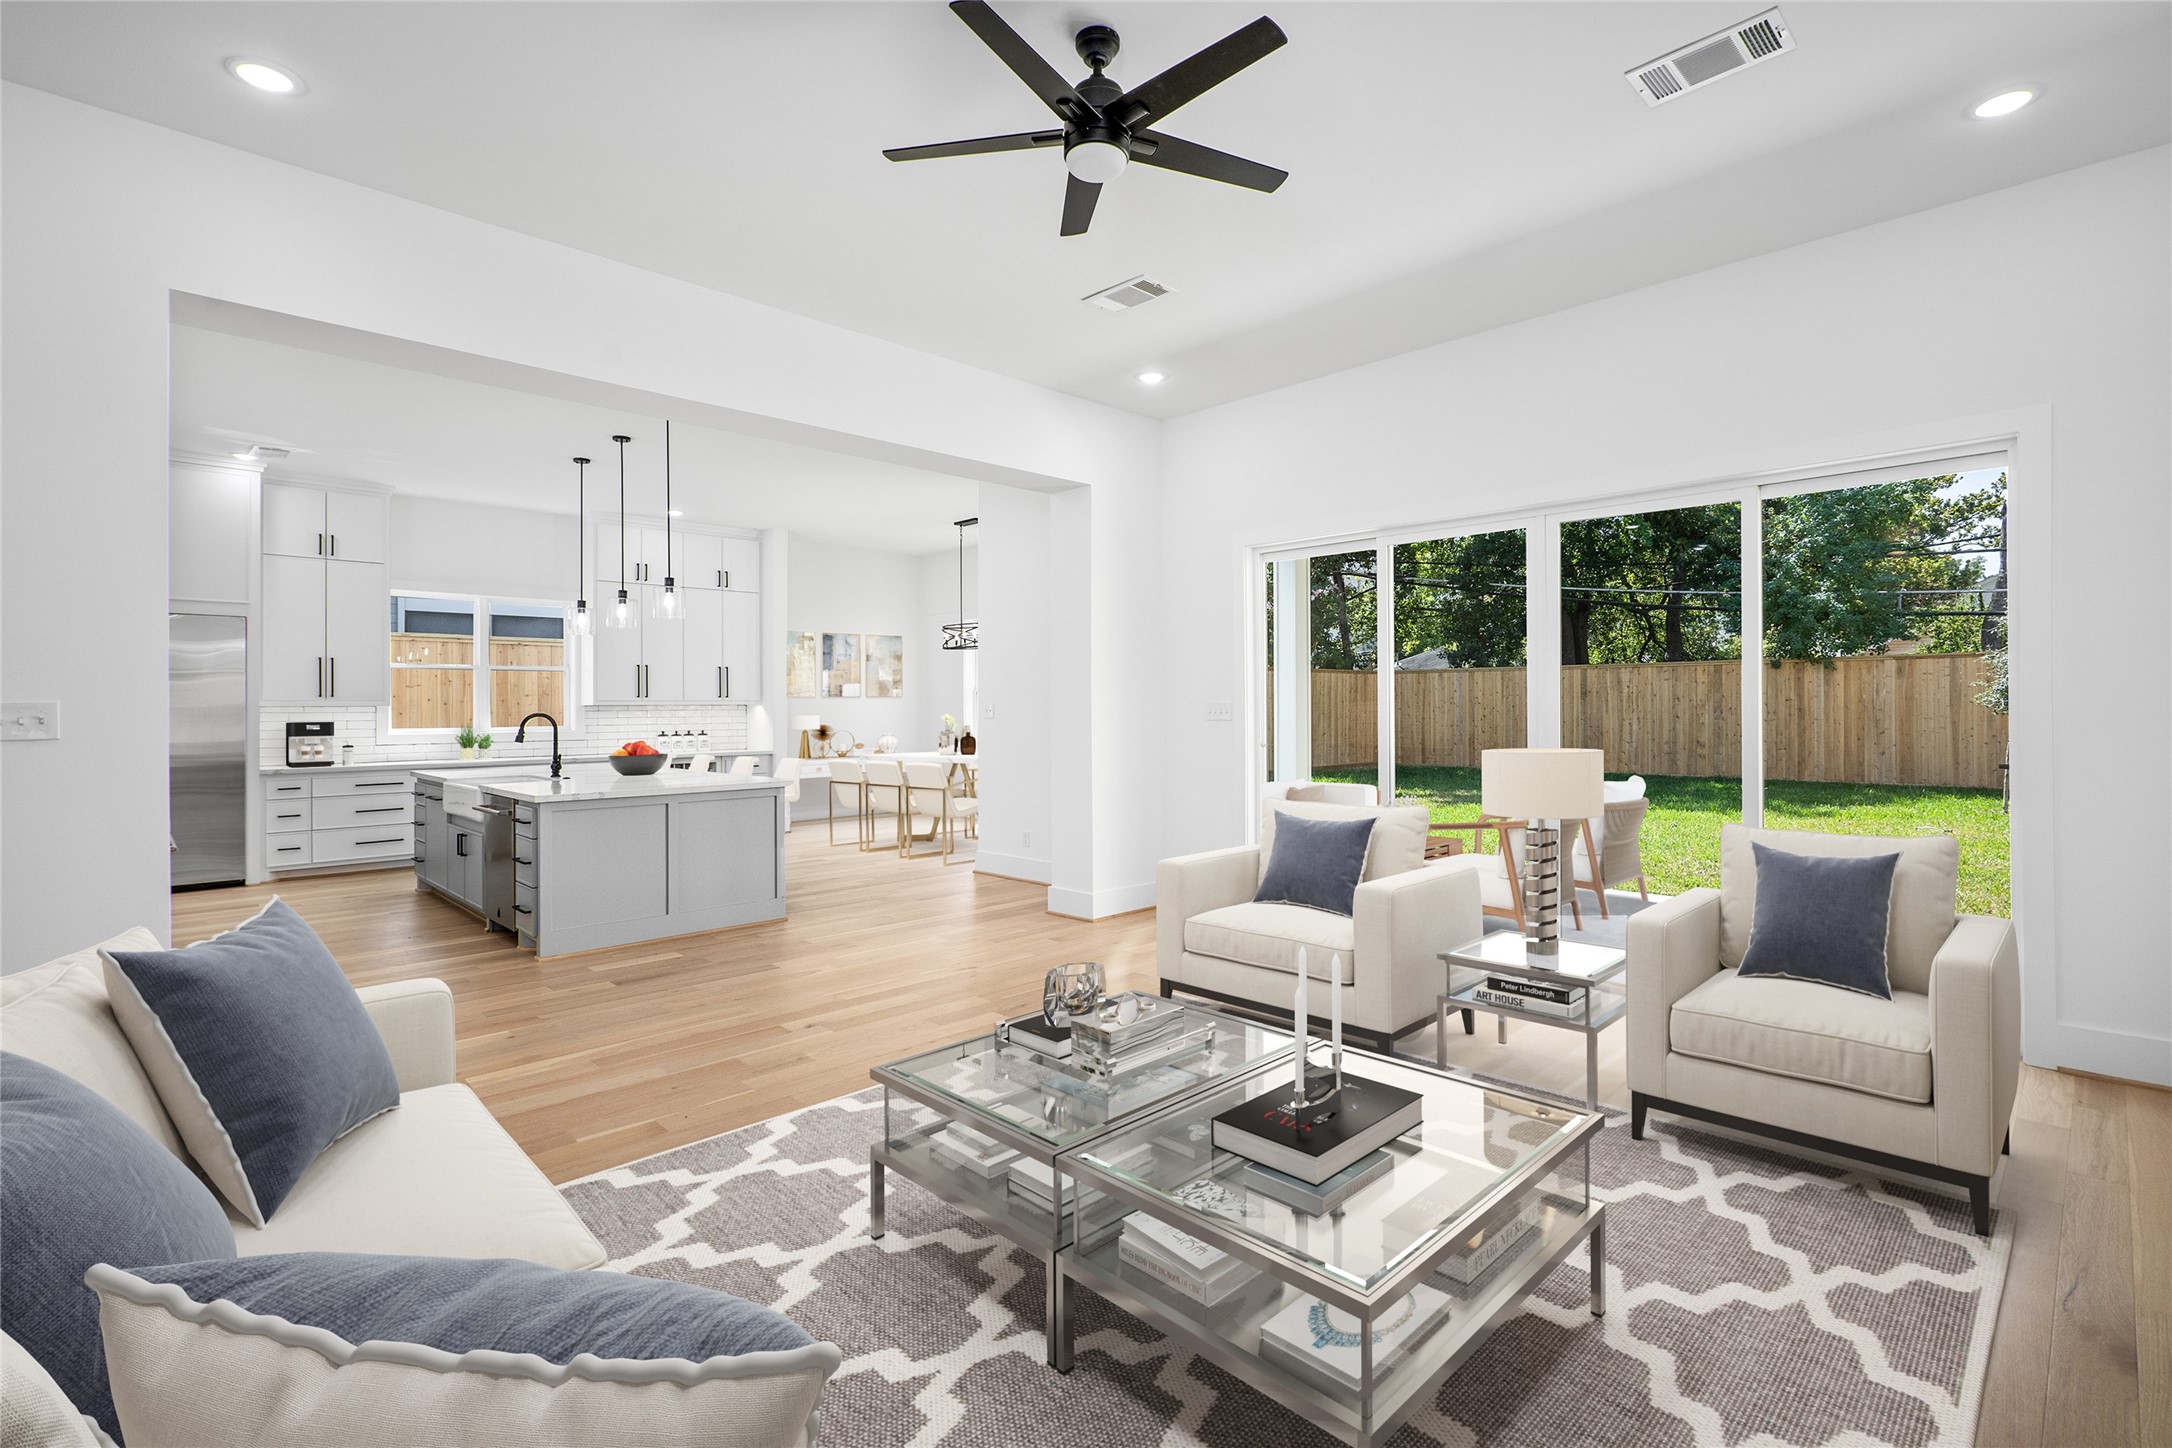 Here is a look from the living room towards the kitchen and dining areas, showing you the open concept home. Let's take a step through the sliding glass doors to the backyard. *Virtual staging has been added*